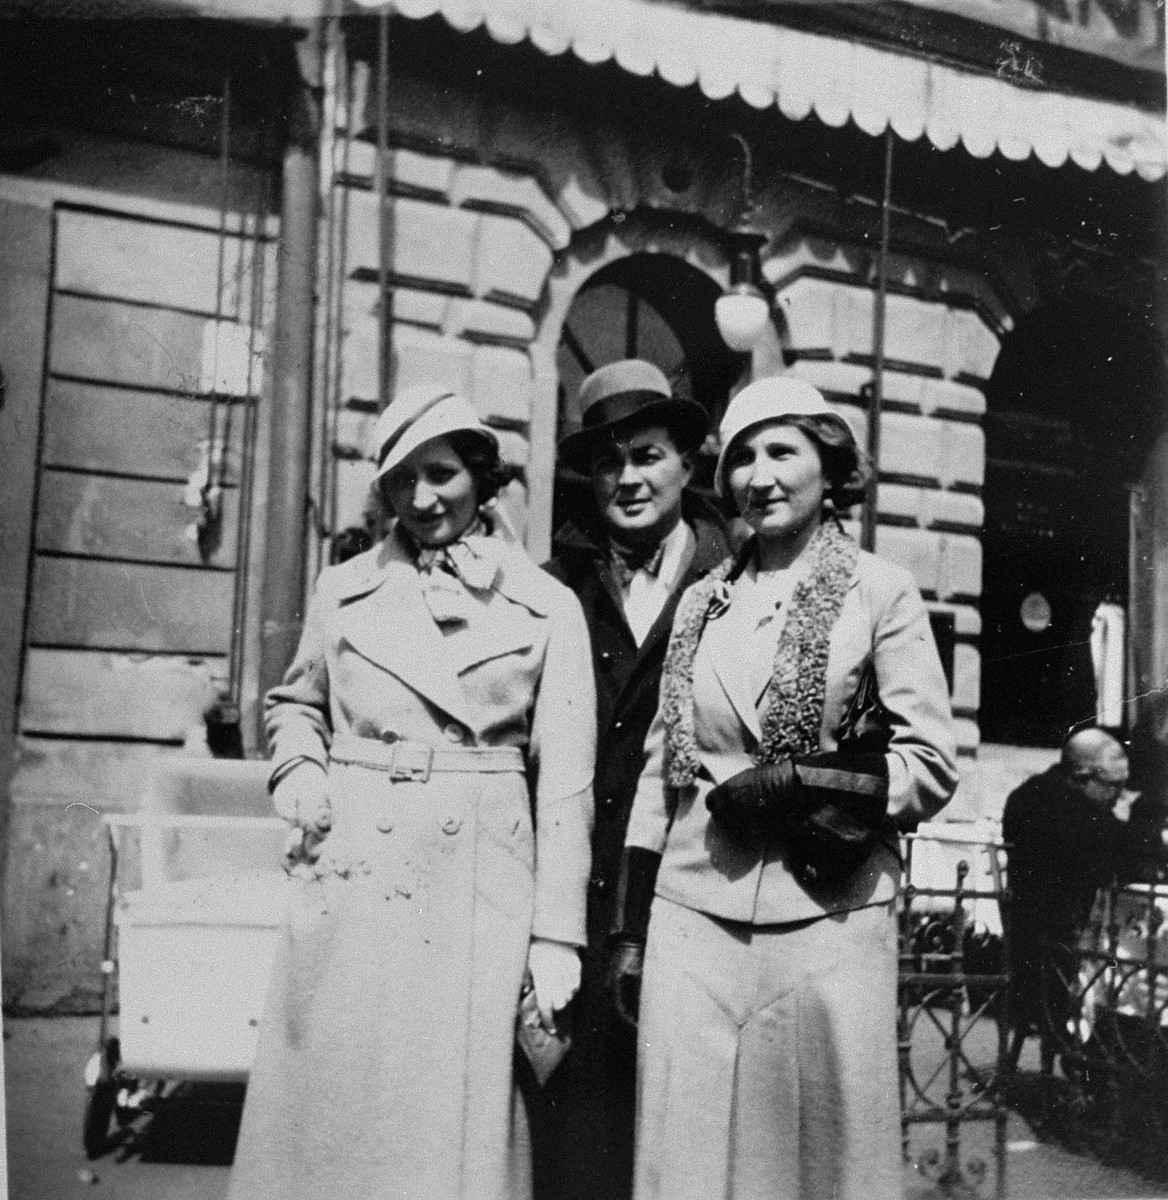 Dr. Joseph Jaksy poses on a street in Bratislava with Mrs. Suran and her daughter Valeria.  

The Surans were among the 25 Jews rescued by Dr. Joseph Jaksy during WWII.  Jaksy engineered the fictitious purchase of the Suran's home in Bratislava; he provided false papers that allowed the Suran children to escape to South America; he registered the elder Surans as his own Slovak domestics; and, after a Gestapo search of the house, he provided Mrs. Suran with false papers and drove her to safety.